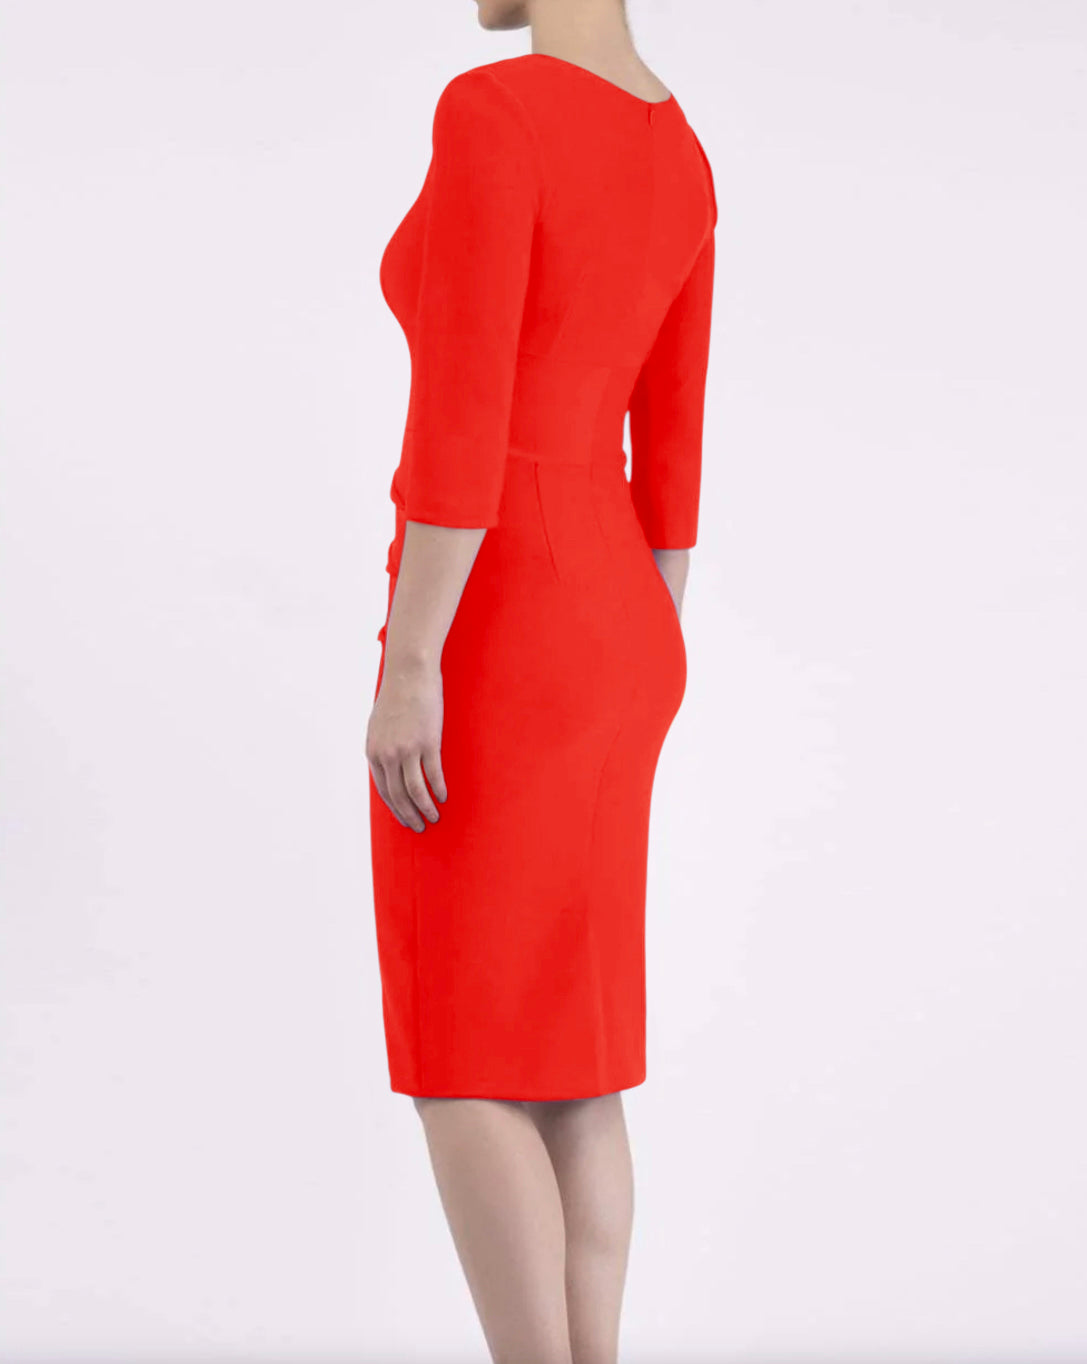 Women' Business Daphne 3/4 Sleeve Dress - Scarlet Red NORA GARDNER | OFFICIAL STORE for work and office